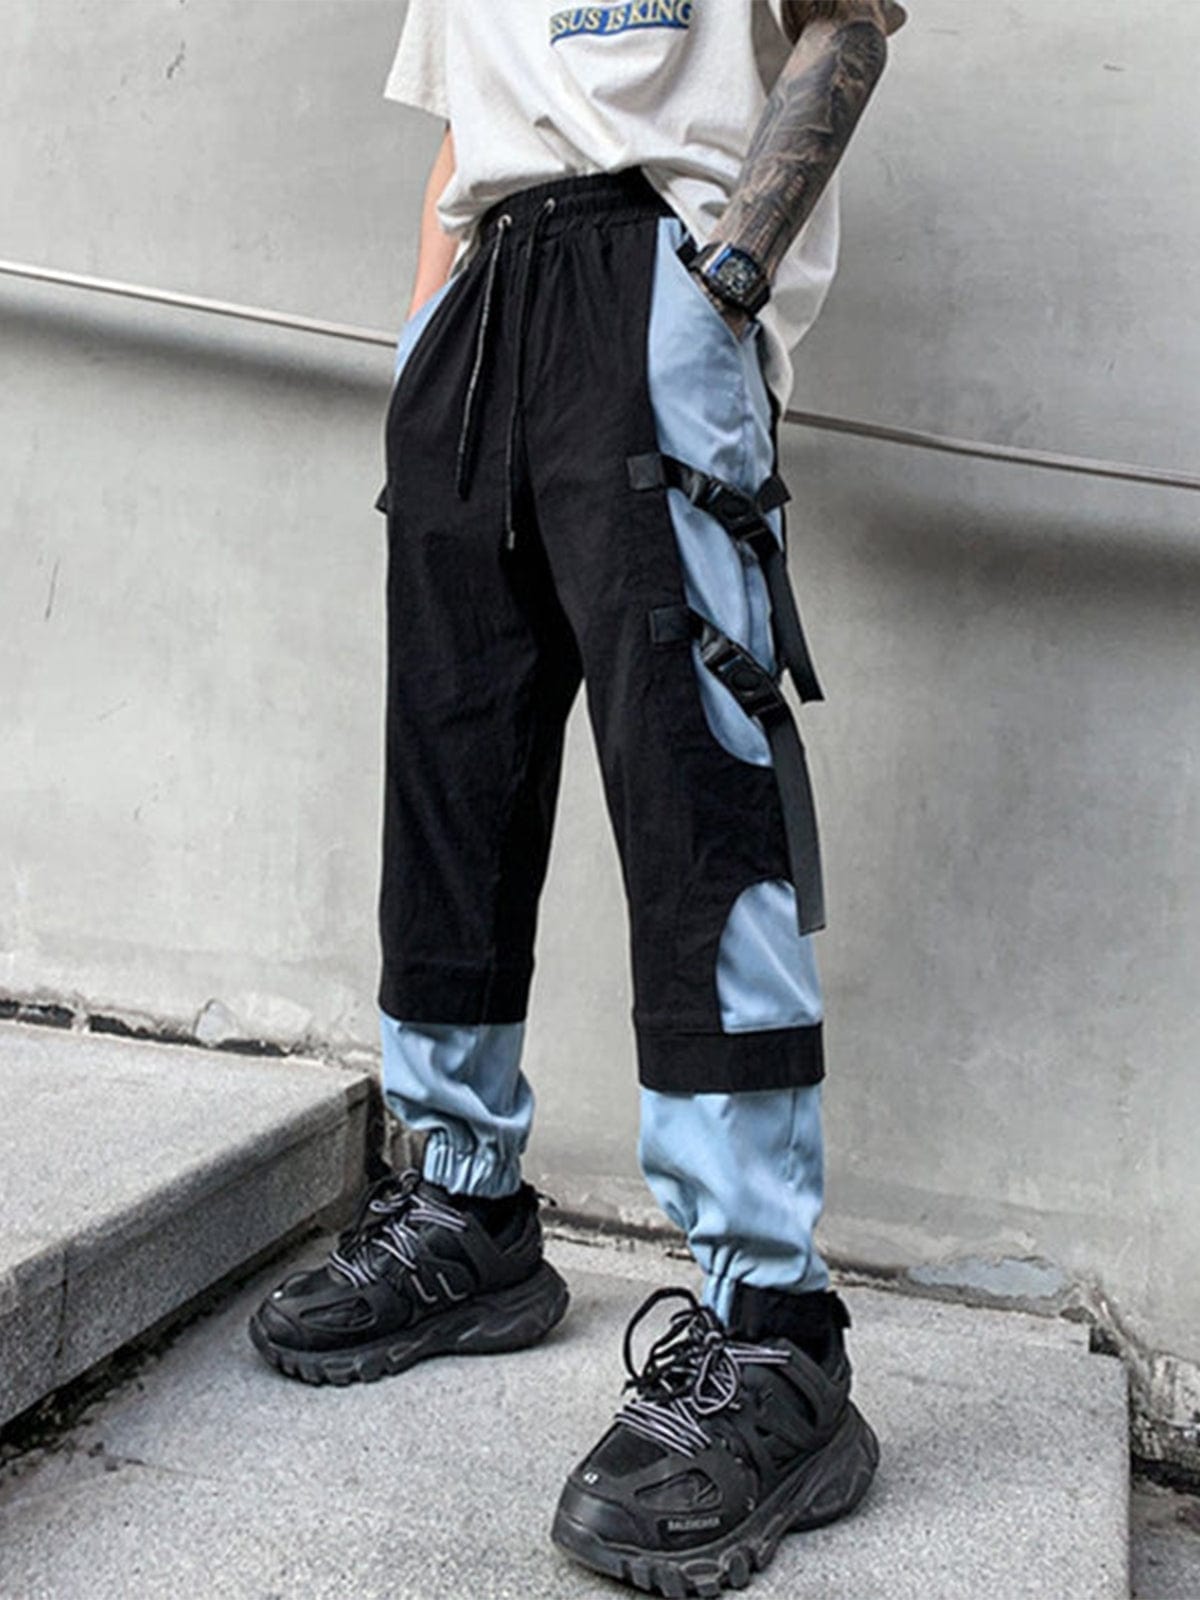 Patchwork Ribbons Buckle Cargo Pants Streetwear Brand Techwear Combat Tactical YUGEN THEORY